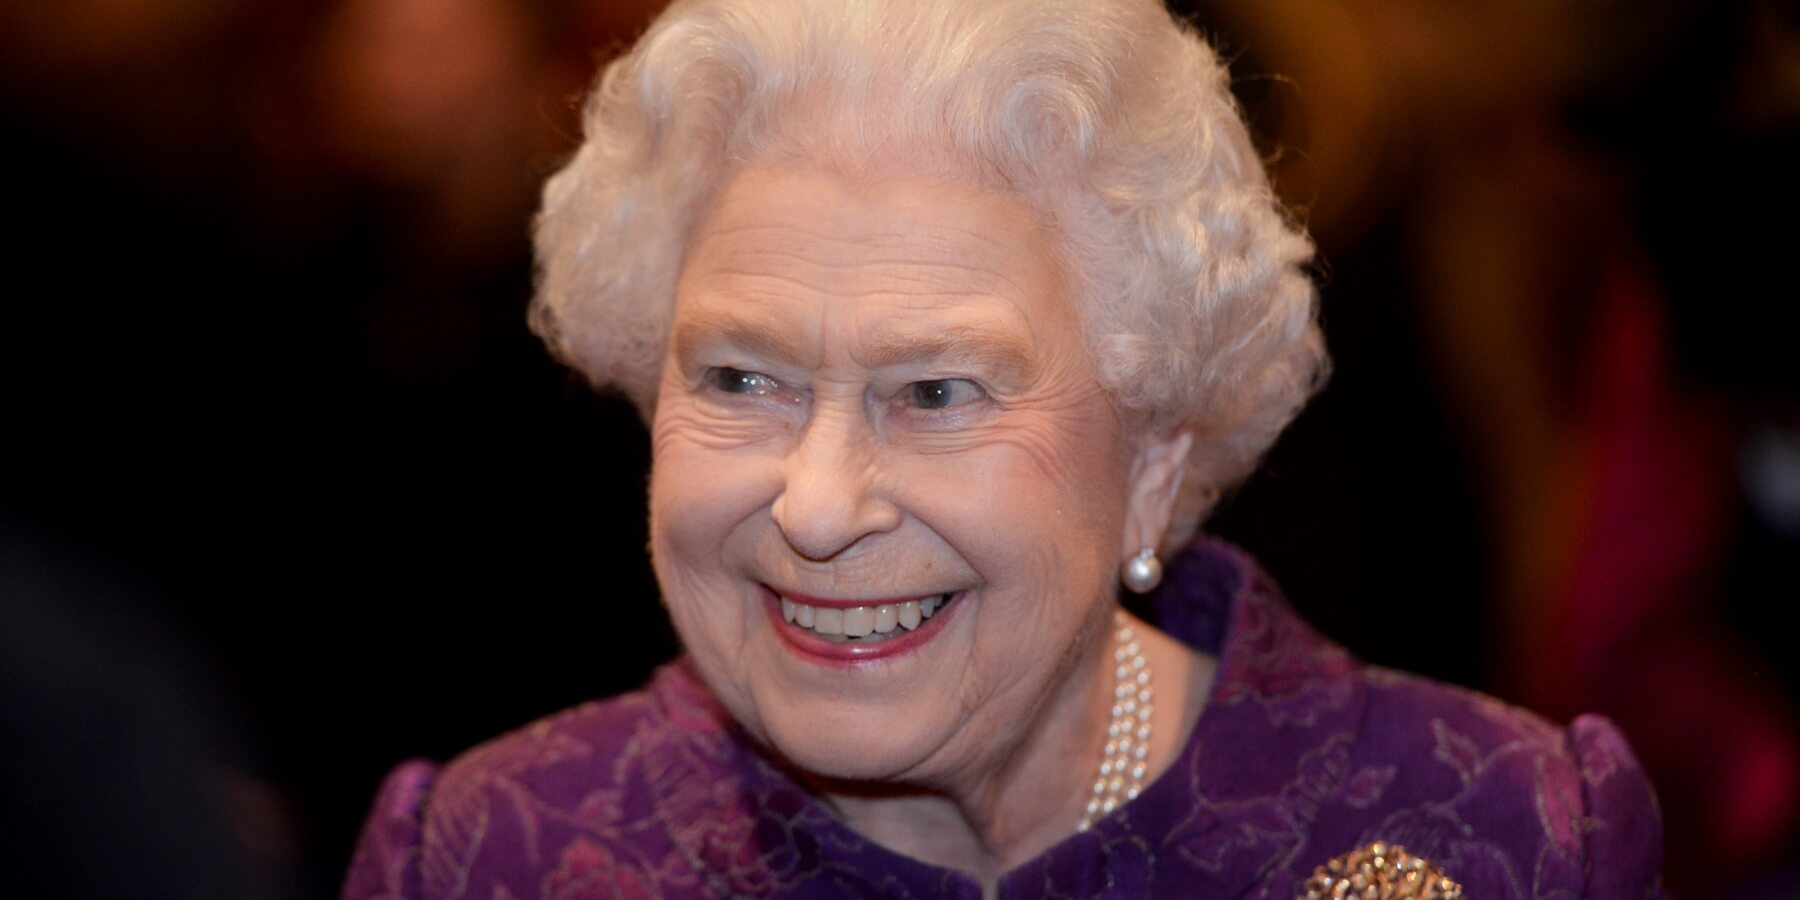 Queen Elizabeth is all smiles at the High Commissioners' Banquet to mark Commonwealth Week at the Guildhall on March 16, 2016 in London, United Kingdom.